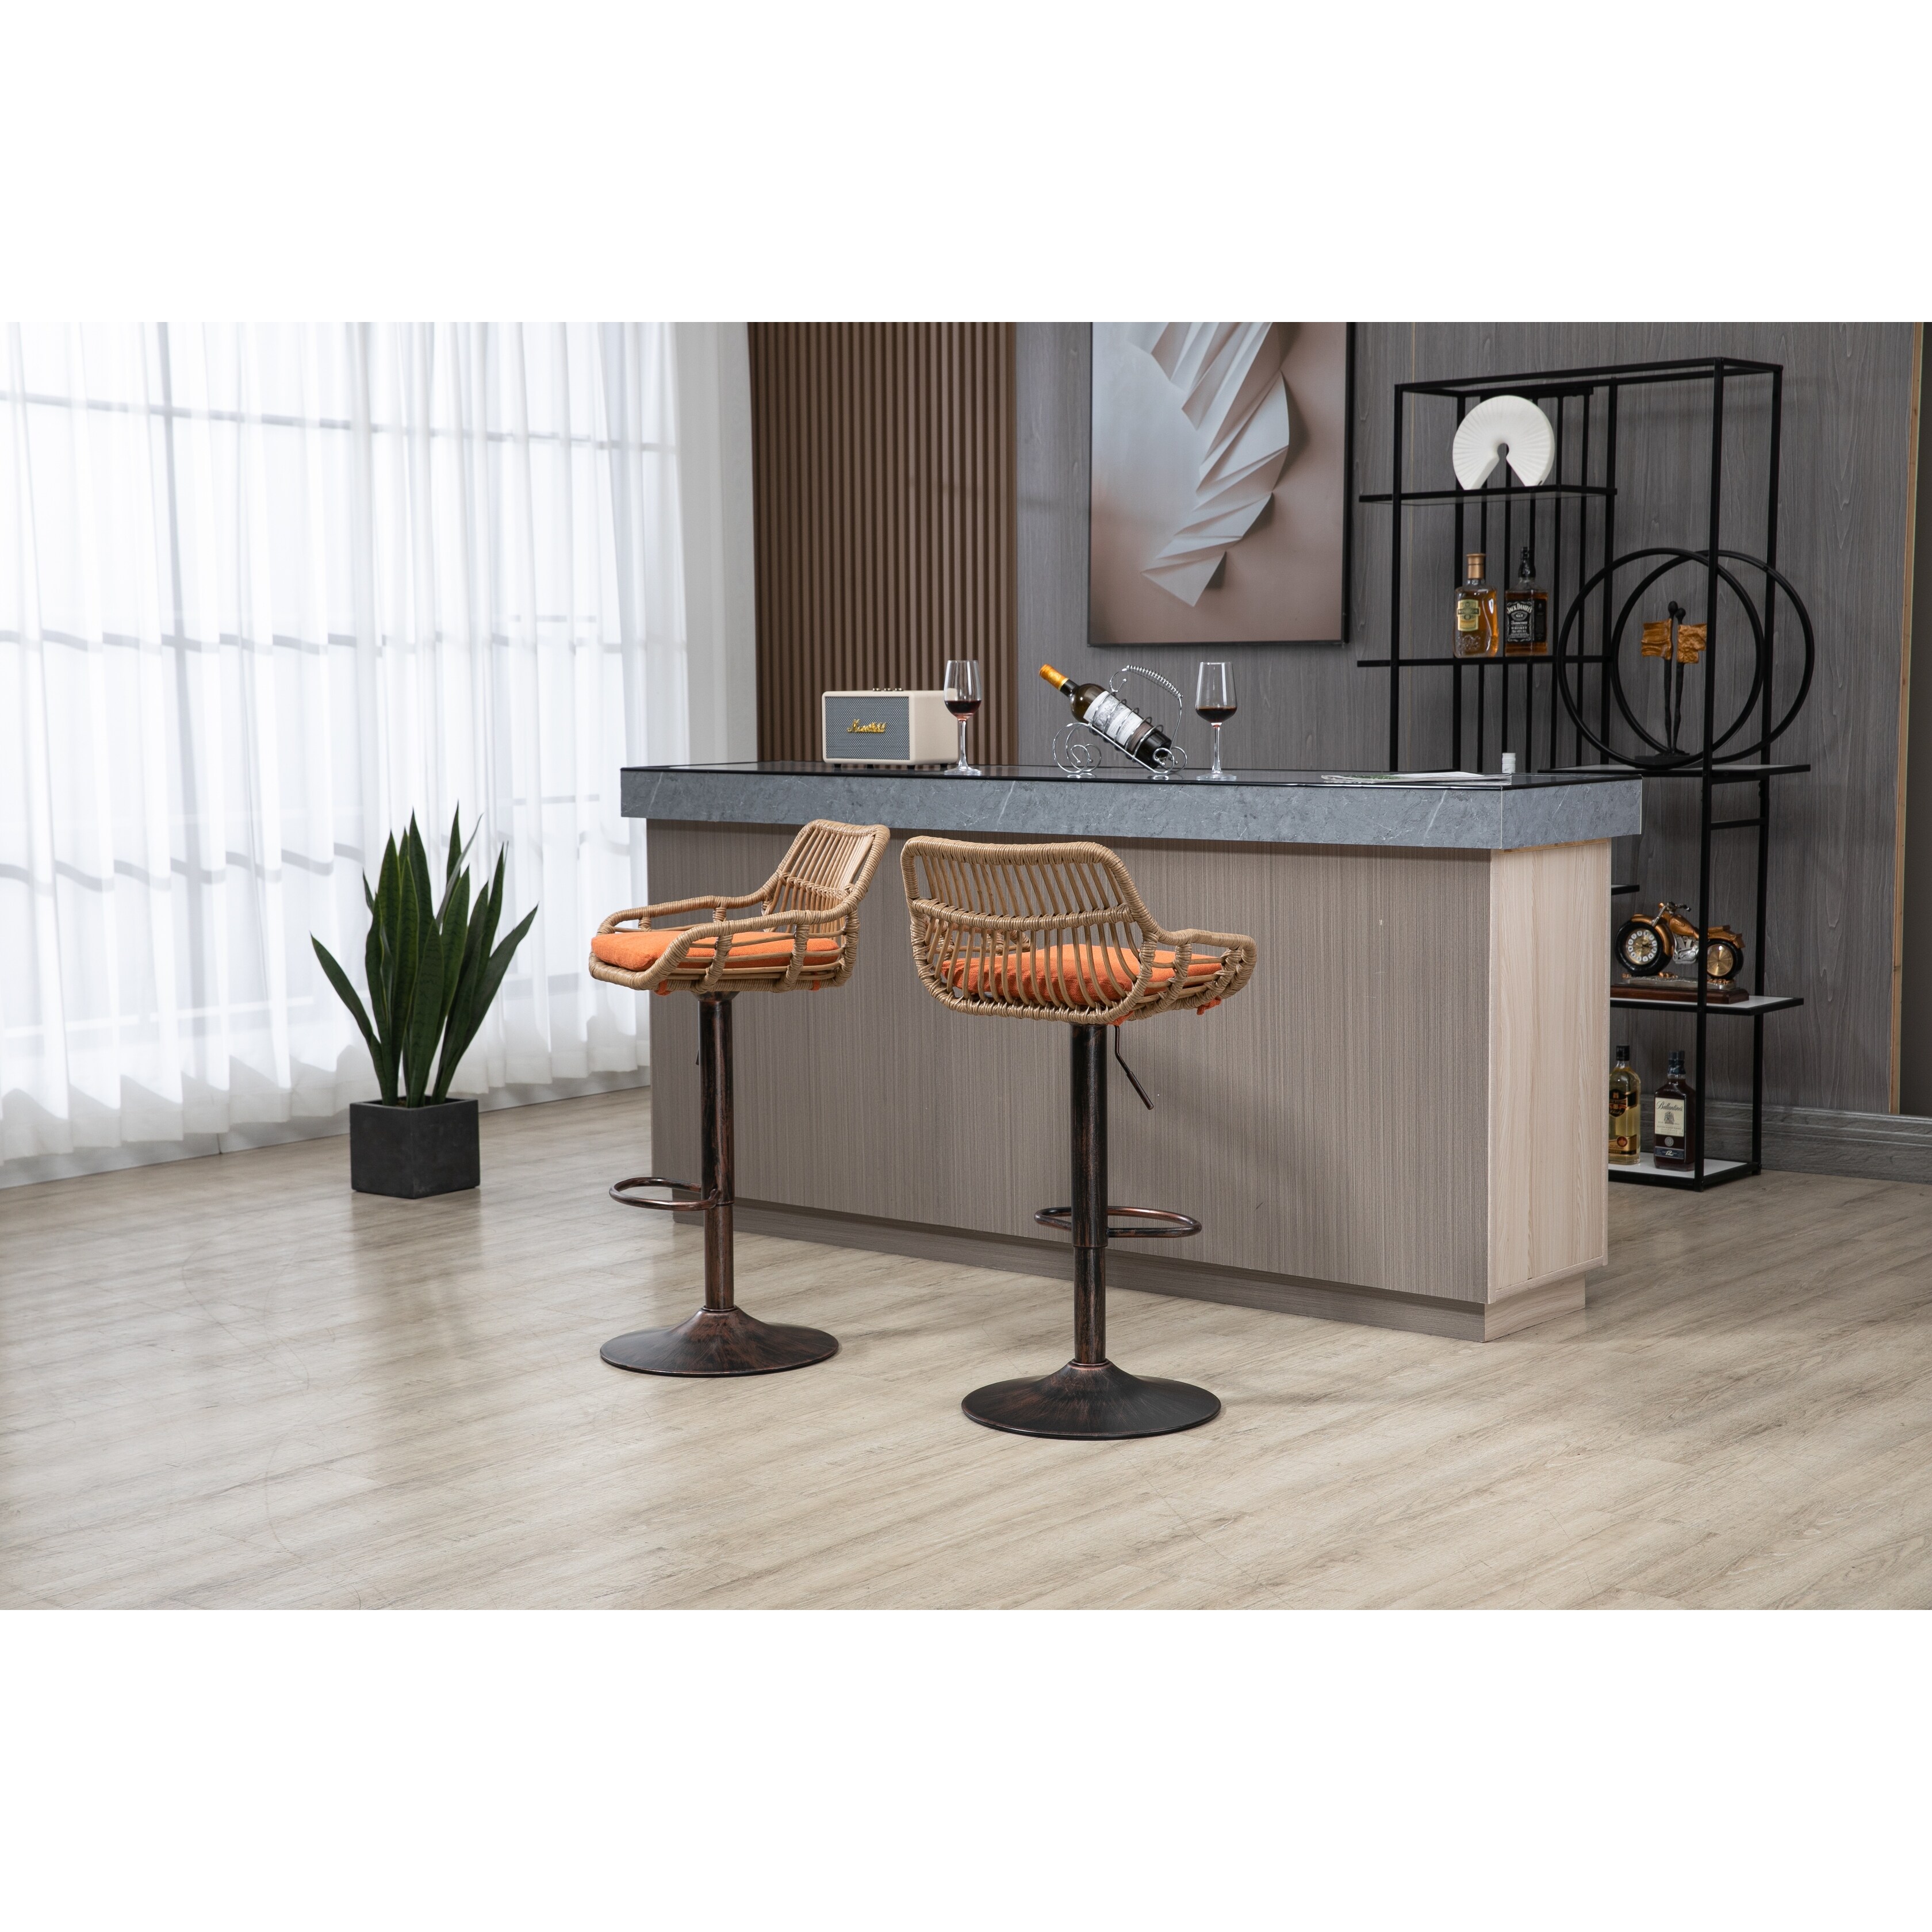 Swivel Bar Stools Set of 2 Adjustable Counter Height Chairs with